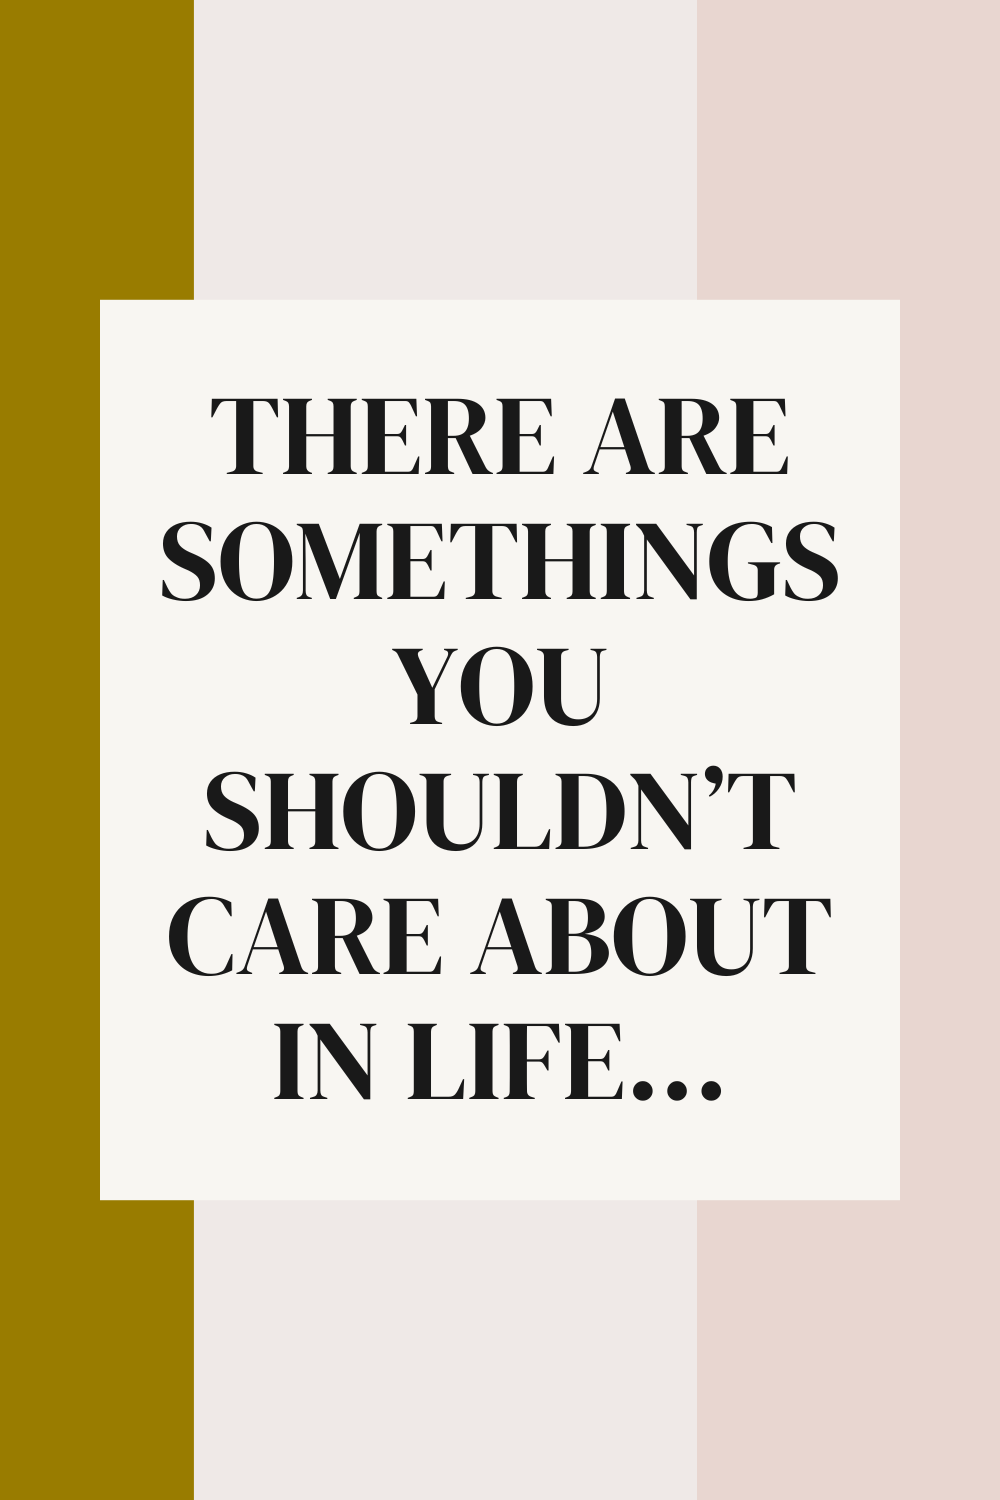 You are currently viewing There are somethings you shouldn’t care about in life…